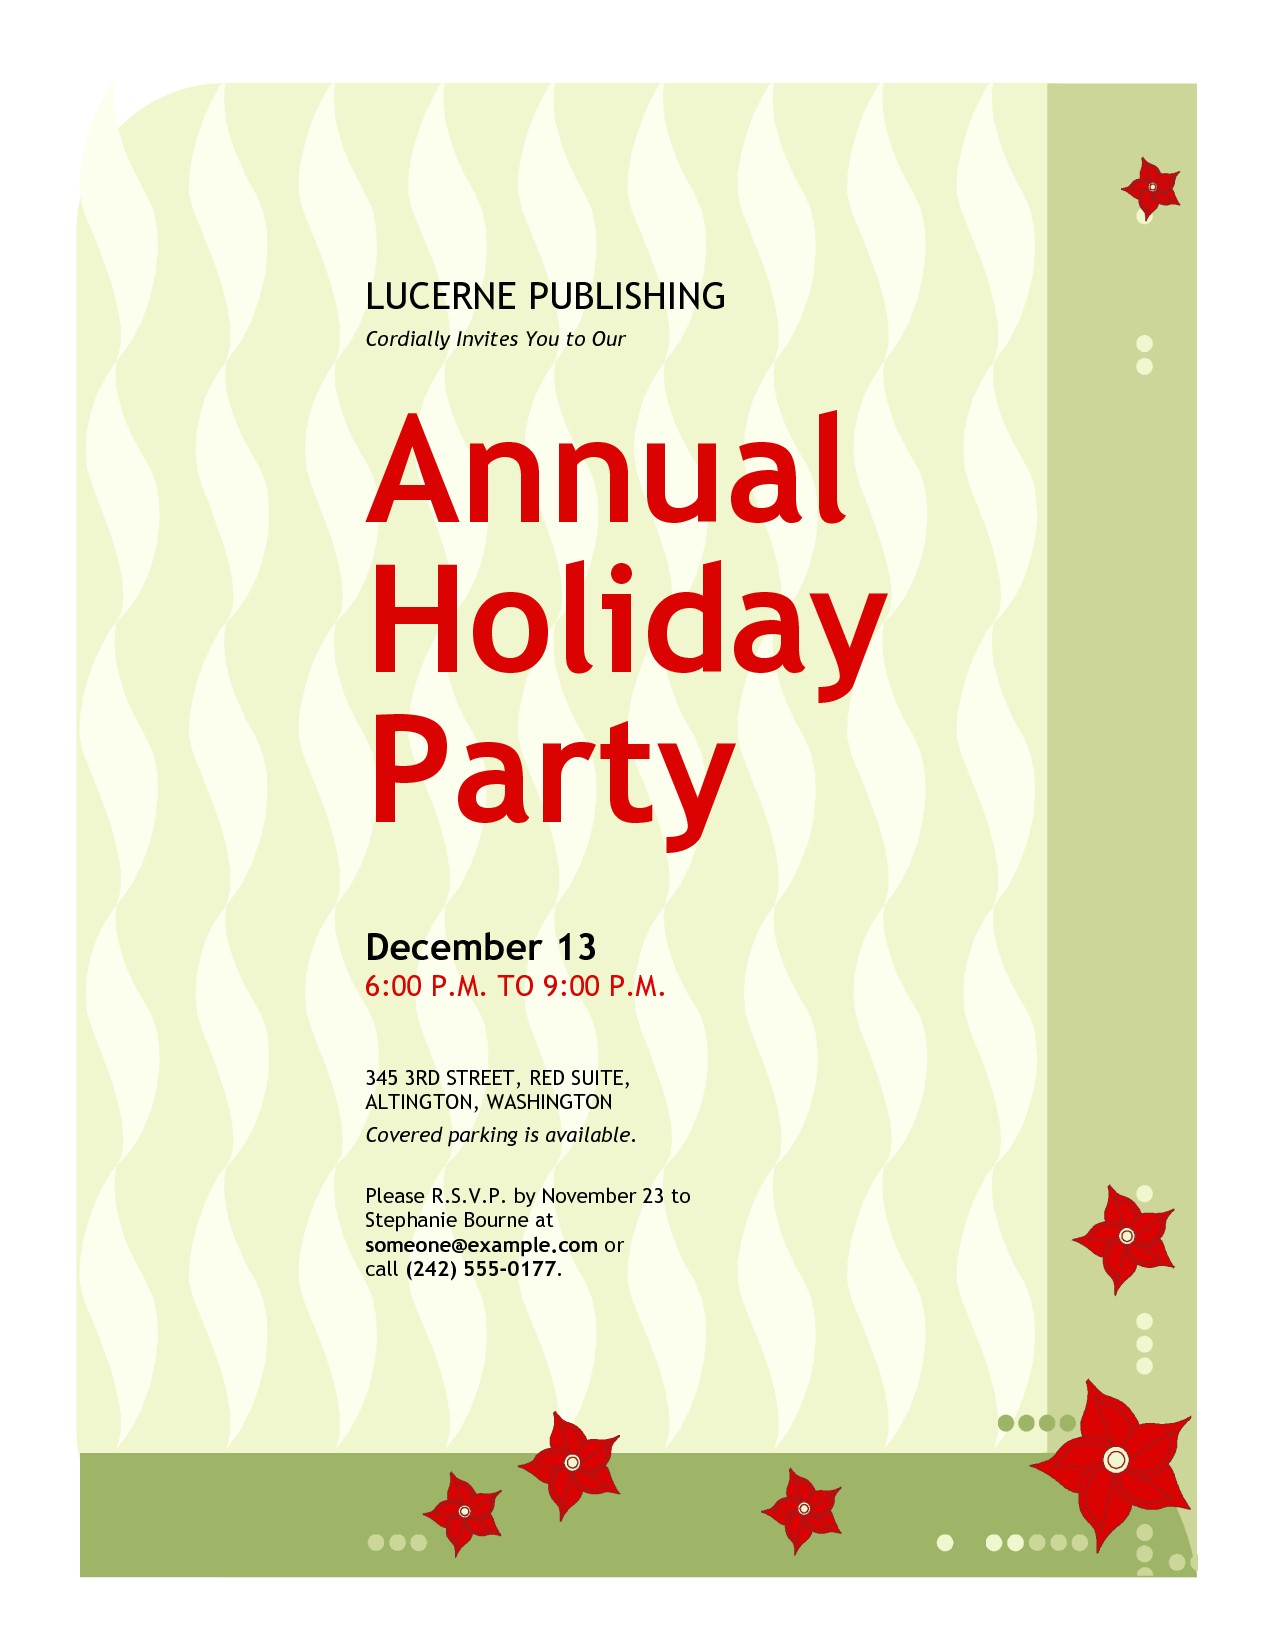 Office Party Invitation Sample Office Christmas Party Invitation Wording Cimvitation